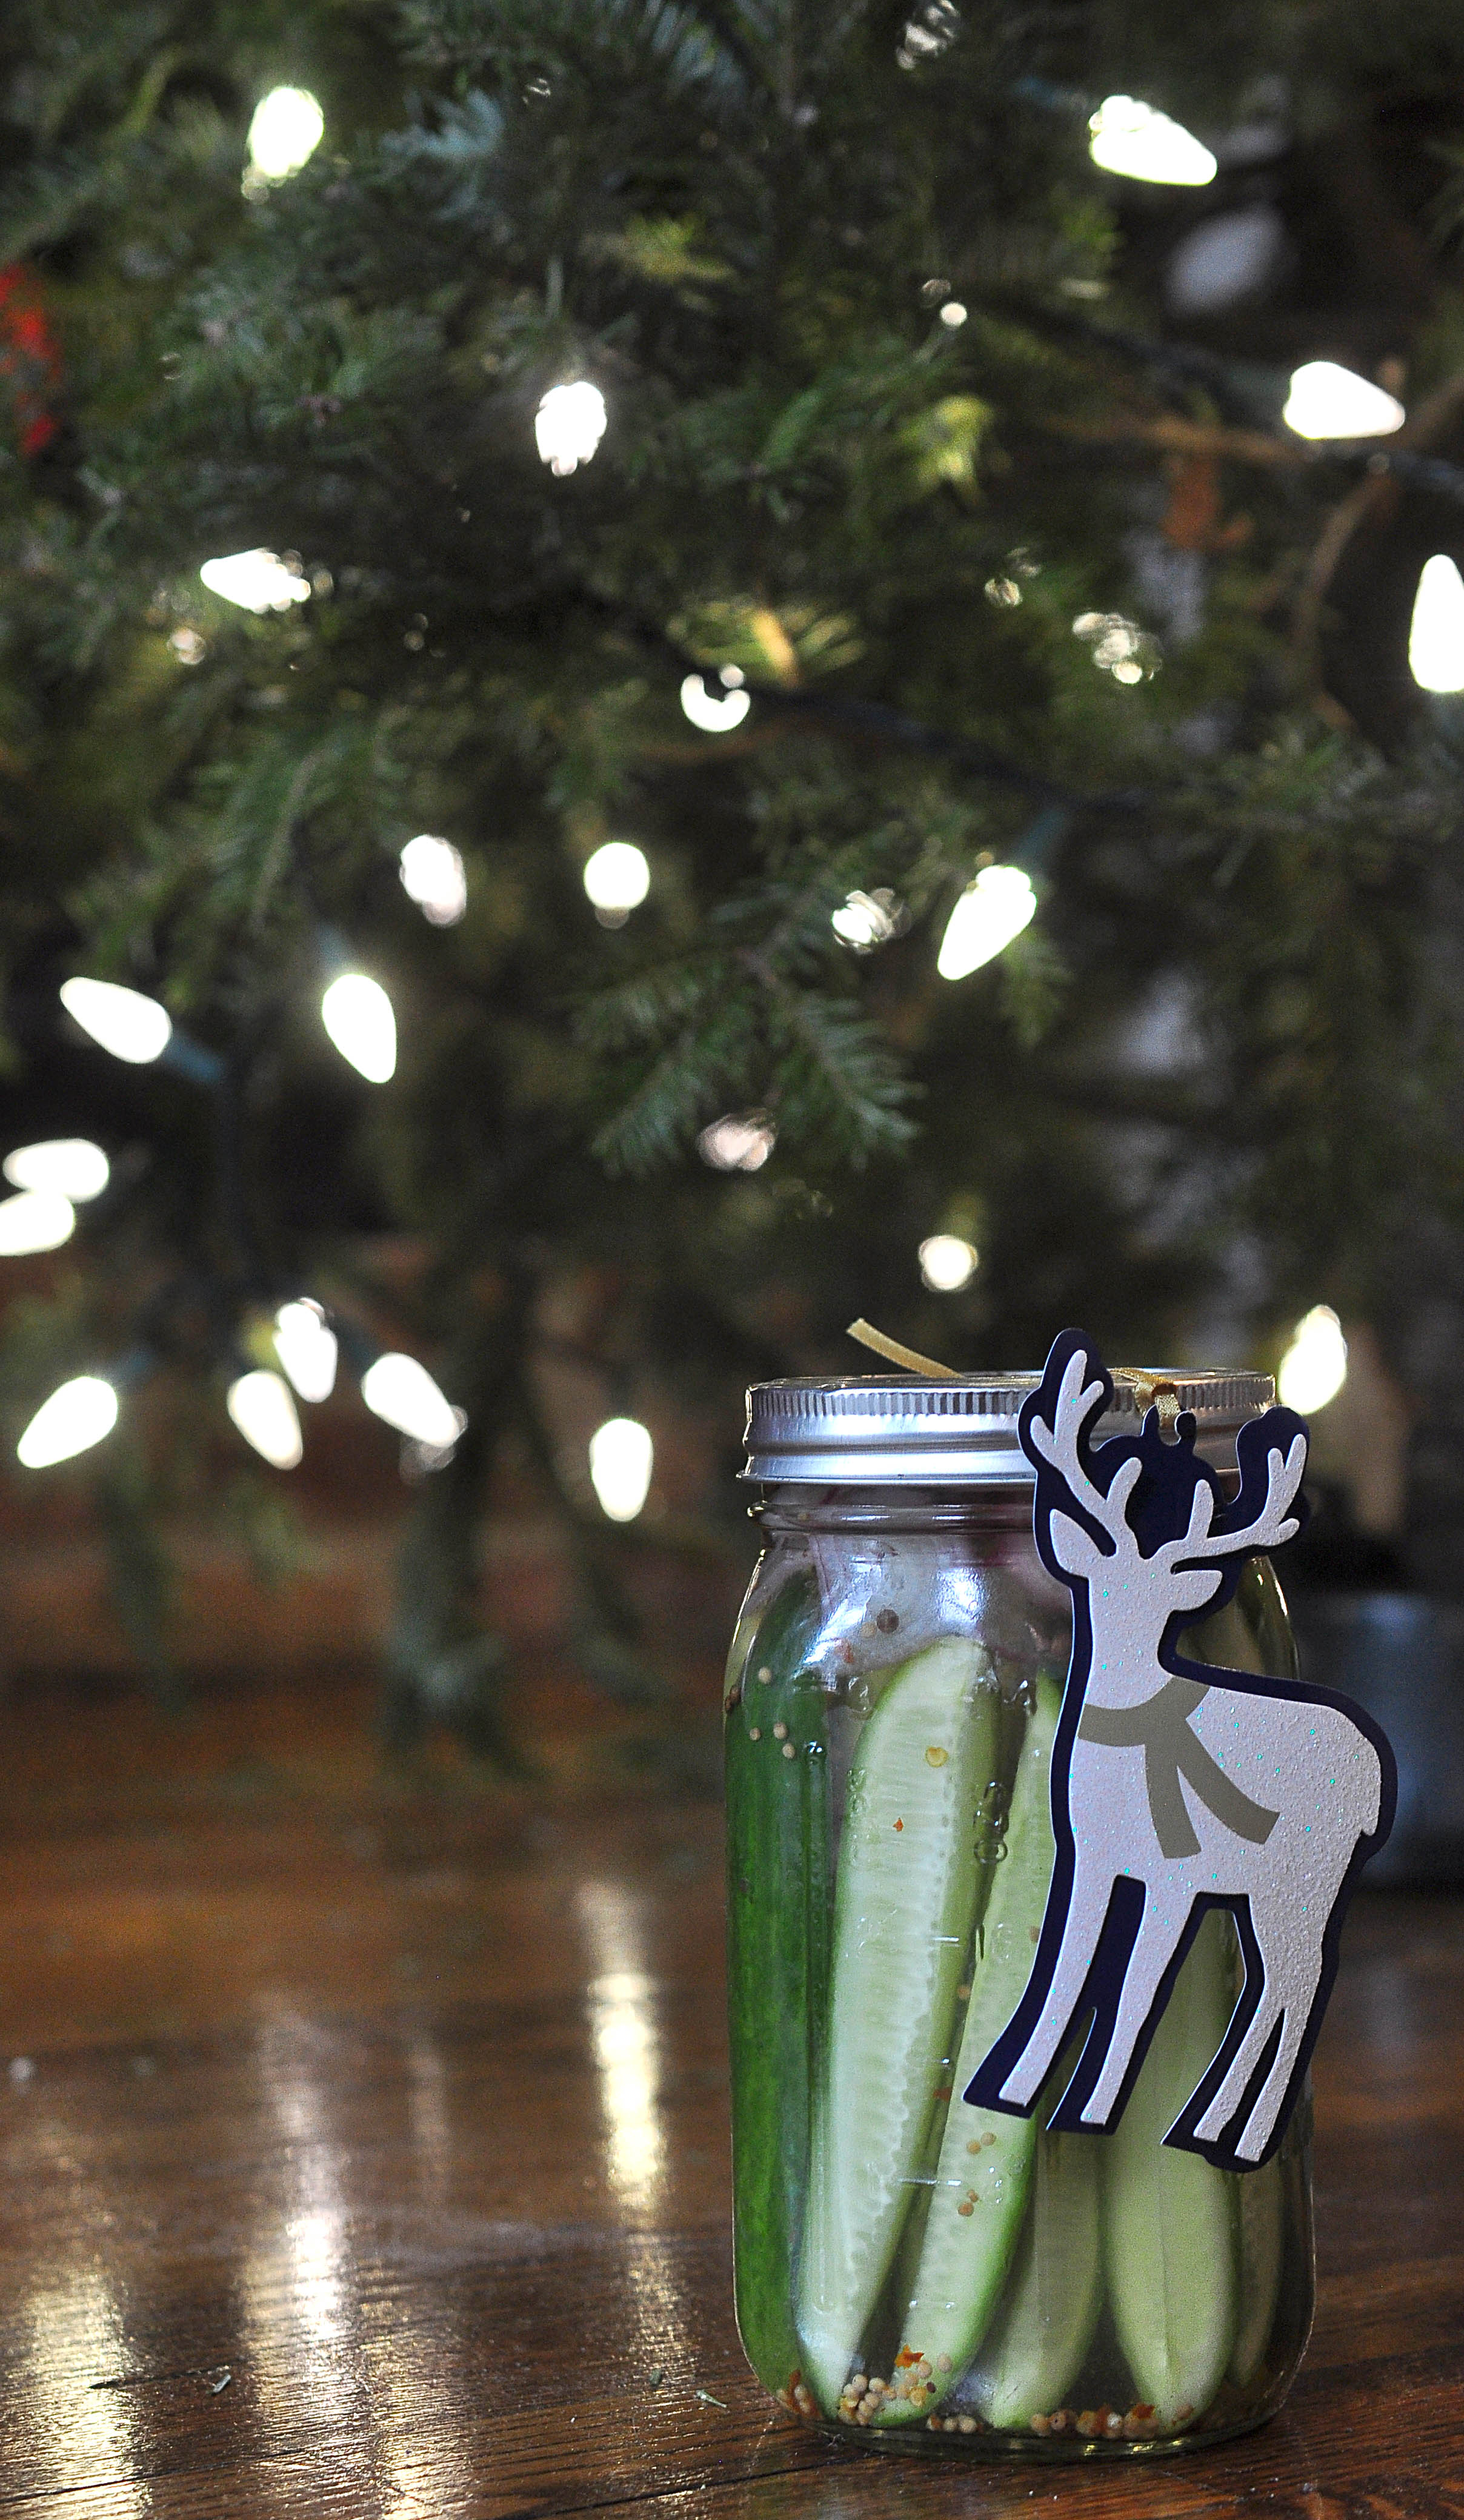 Holiday Gift Idea: Homemade Sour Dill Pickles